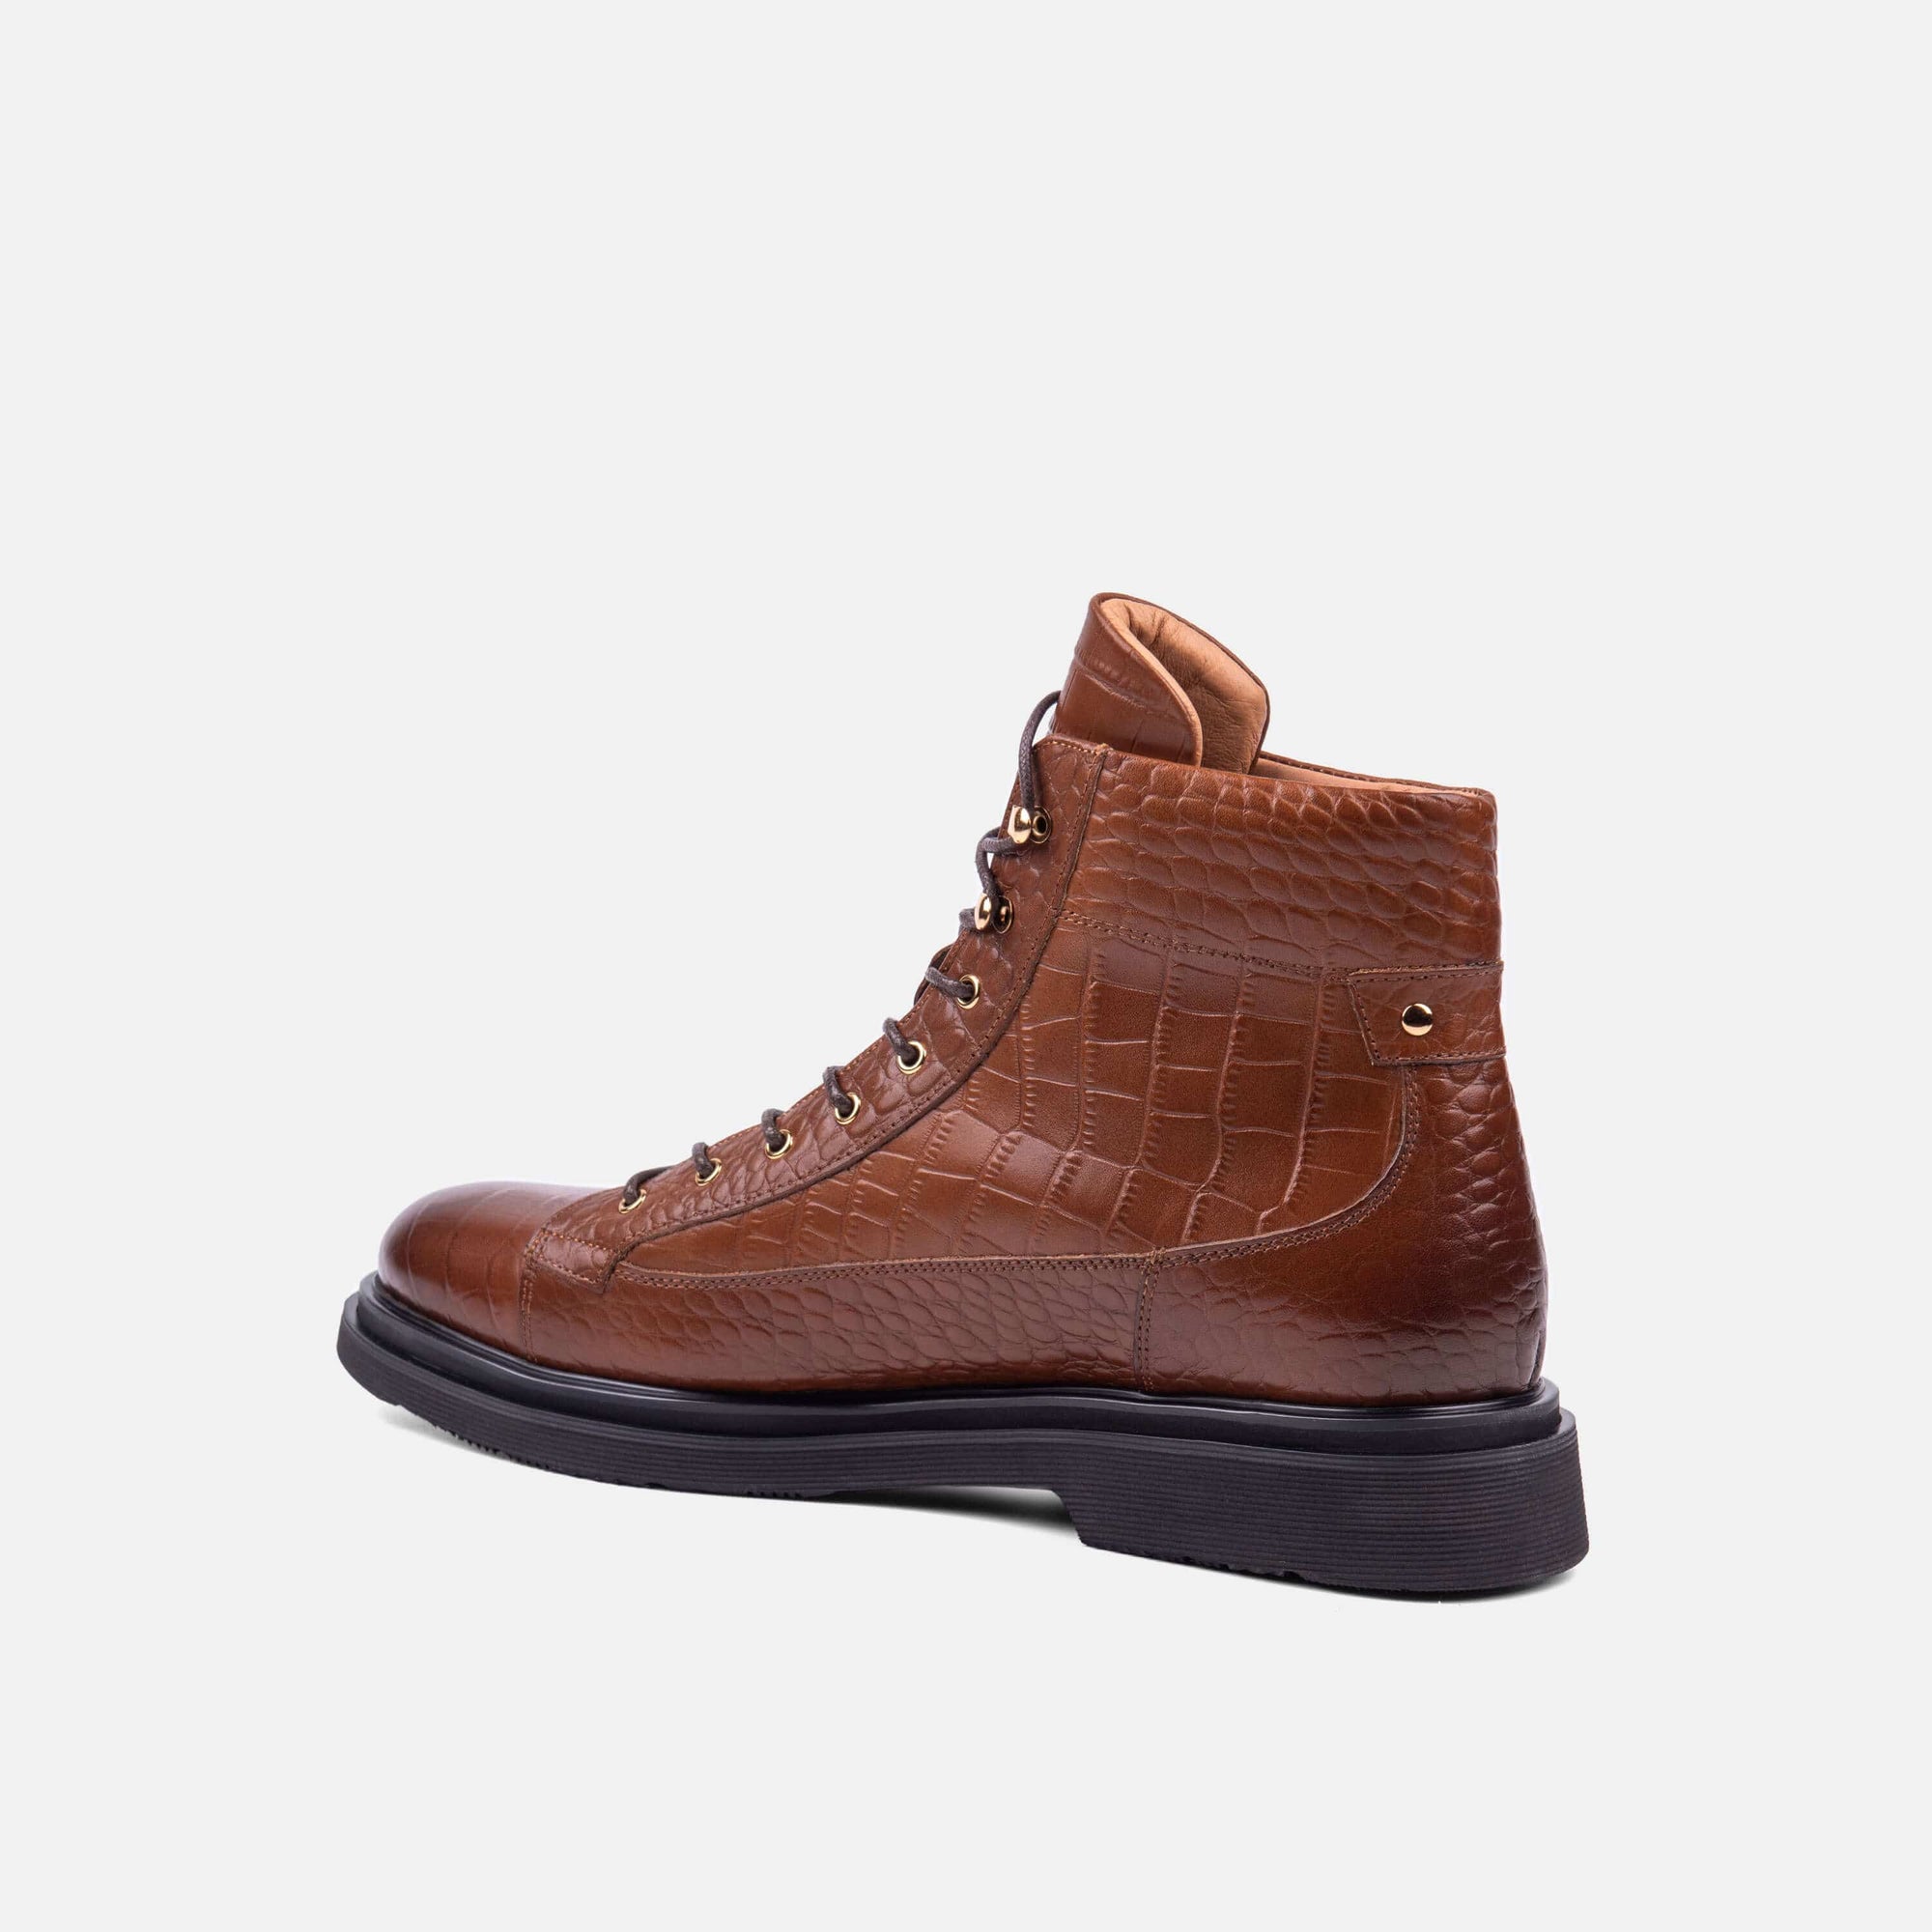 Aiden Brown Crocskin Leather Combat Boots